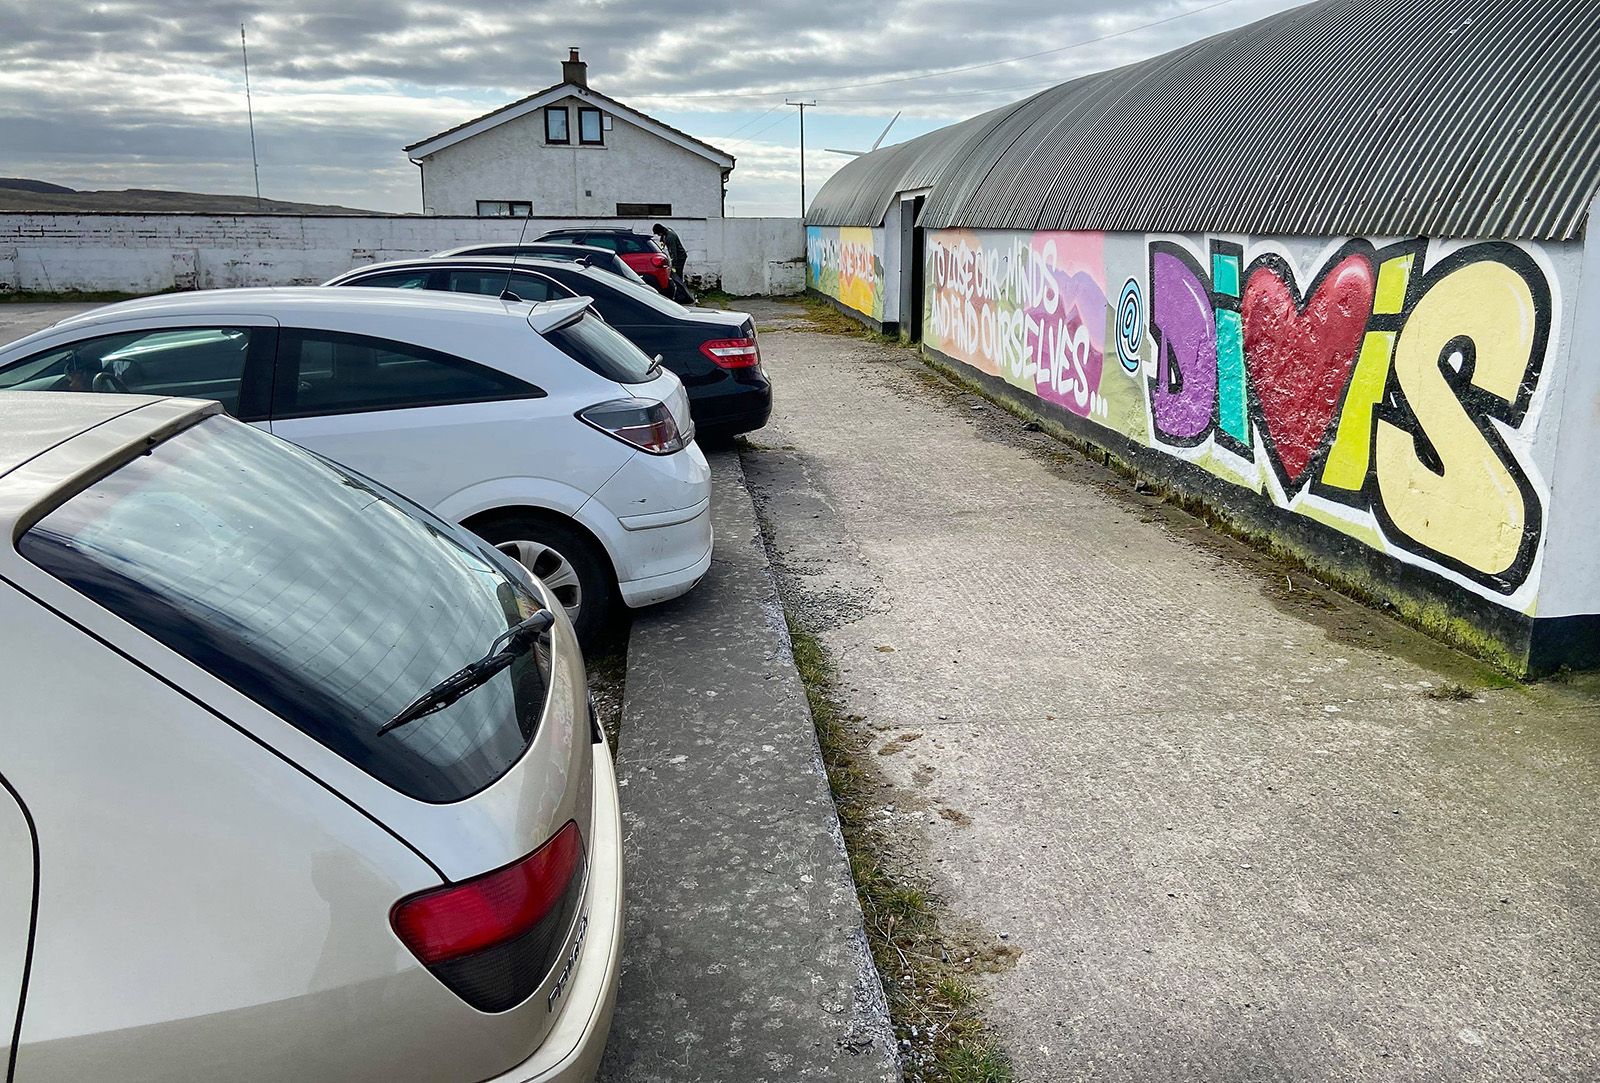 SAFE AND SOUND: Drivers parked in the carpark at Divis